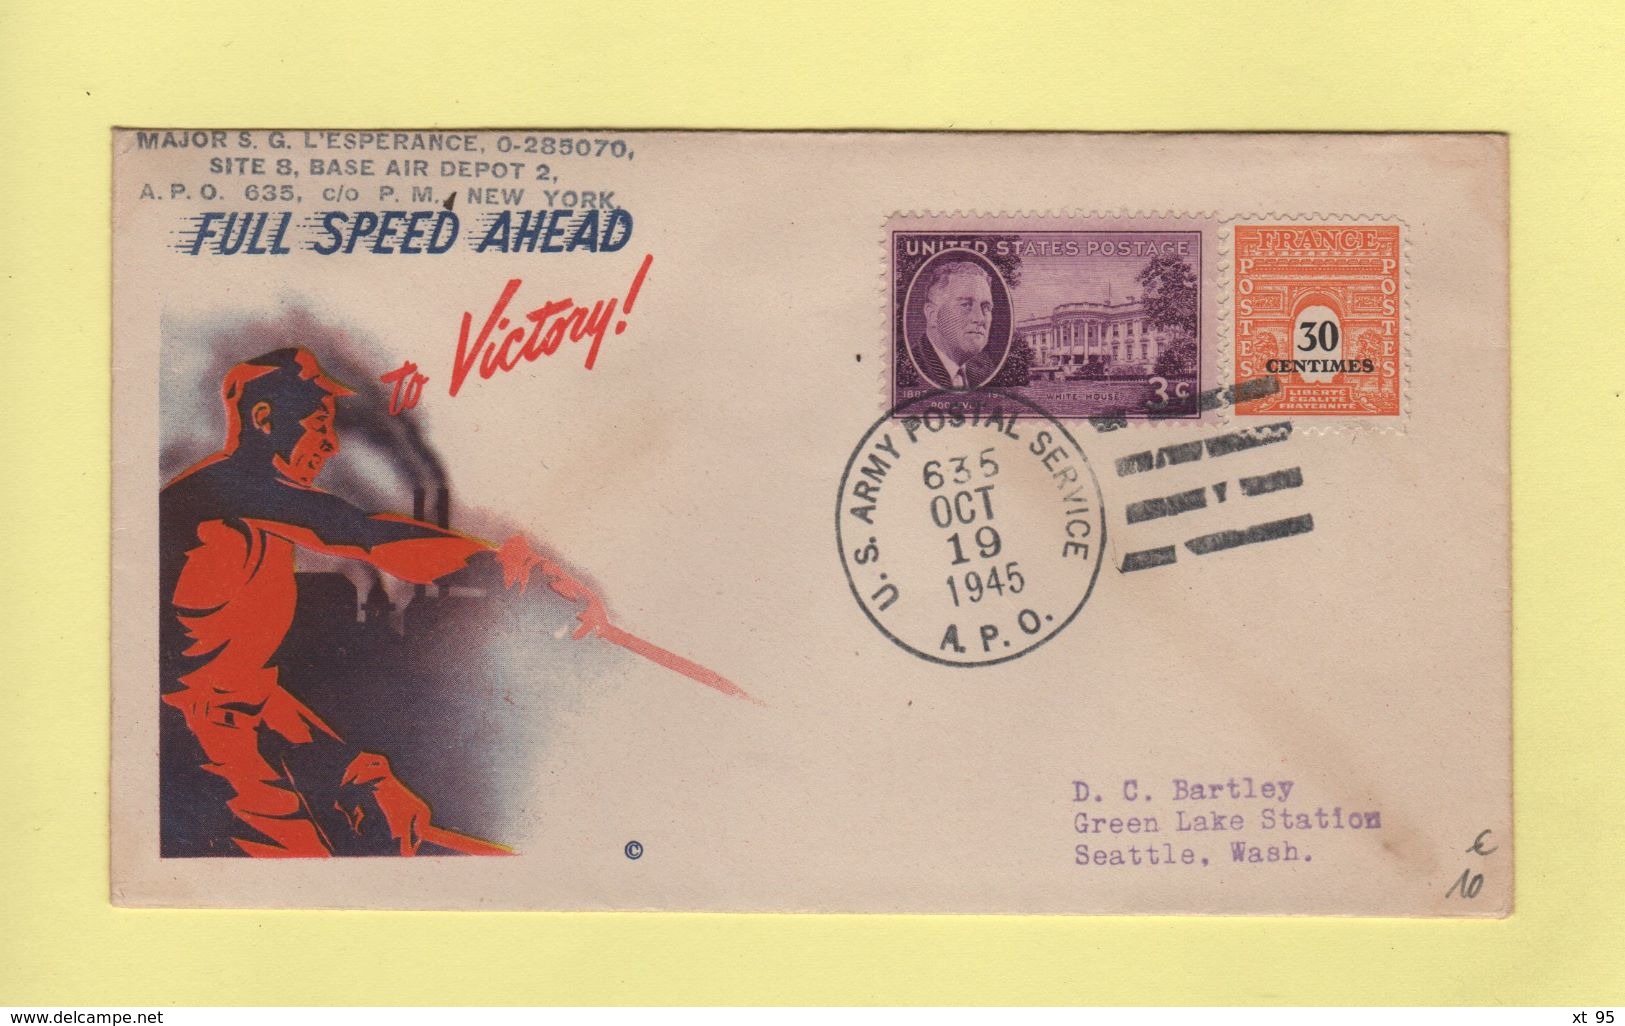 APO 635 - US Postal Army Service - 19 Oct 1945 - Mixte US France - Full Speed Ahead For Victory - Guerre De 1939-45